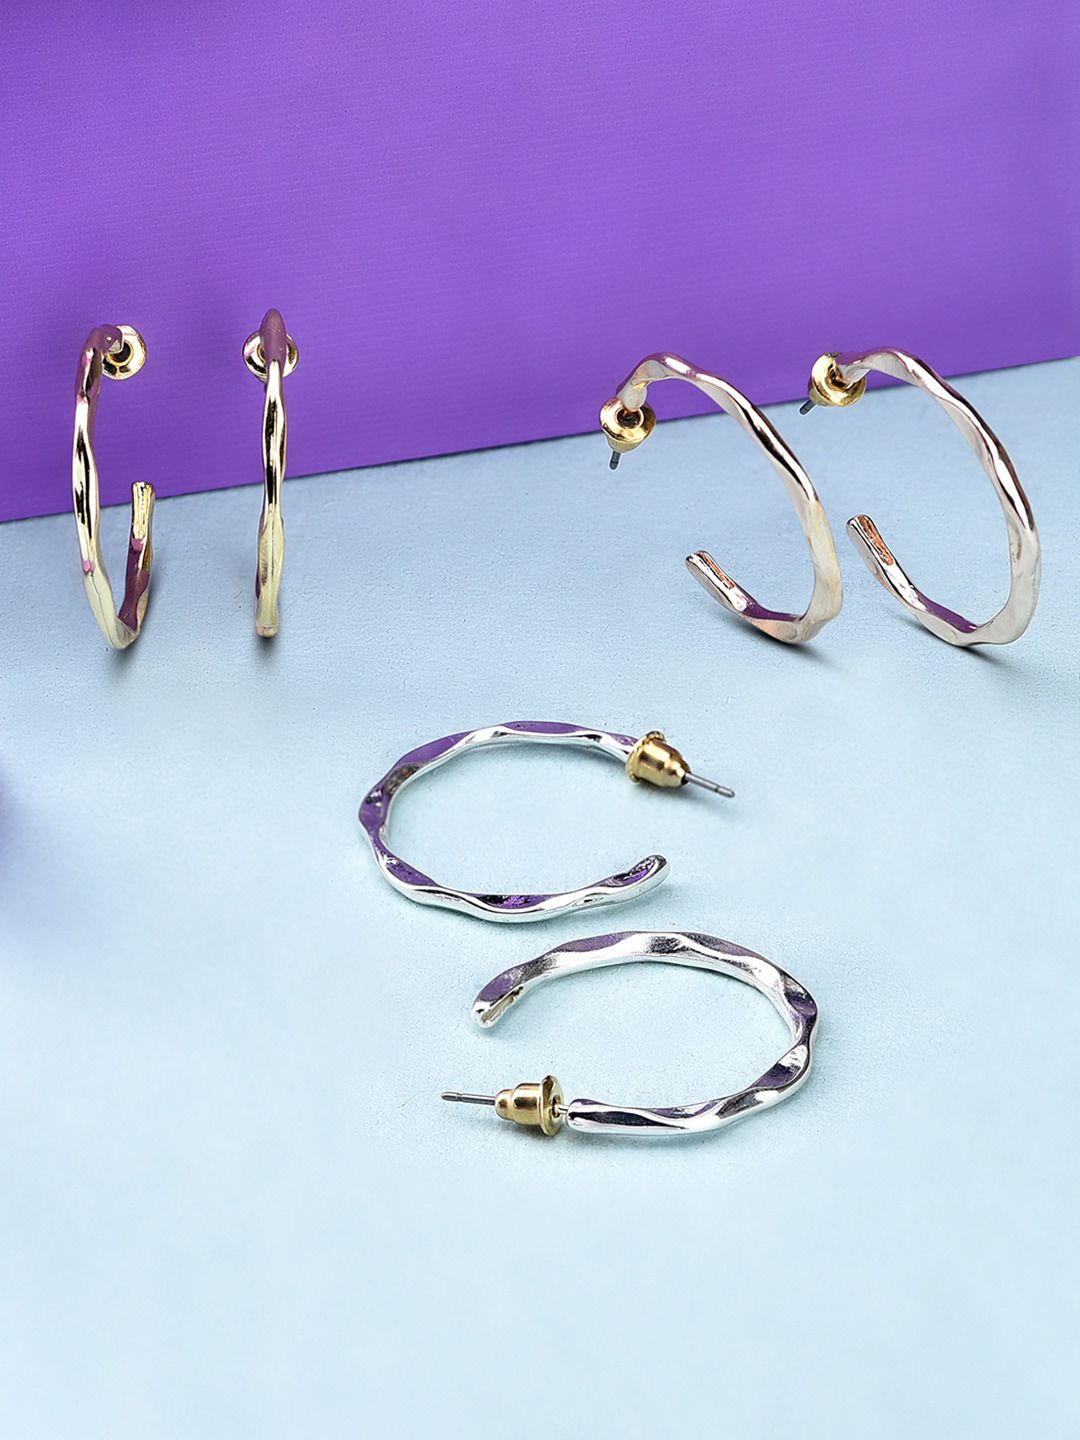 Accessorize Set Of 3 Silver-Toned Geometric Hoop Earrings Price in India